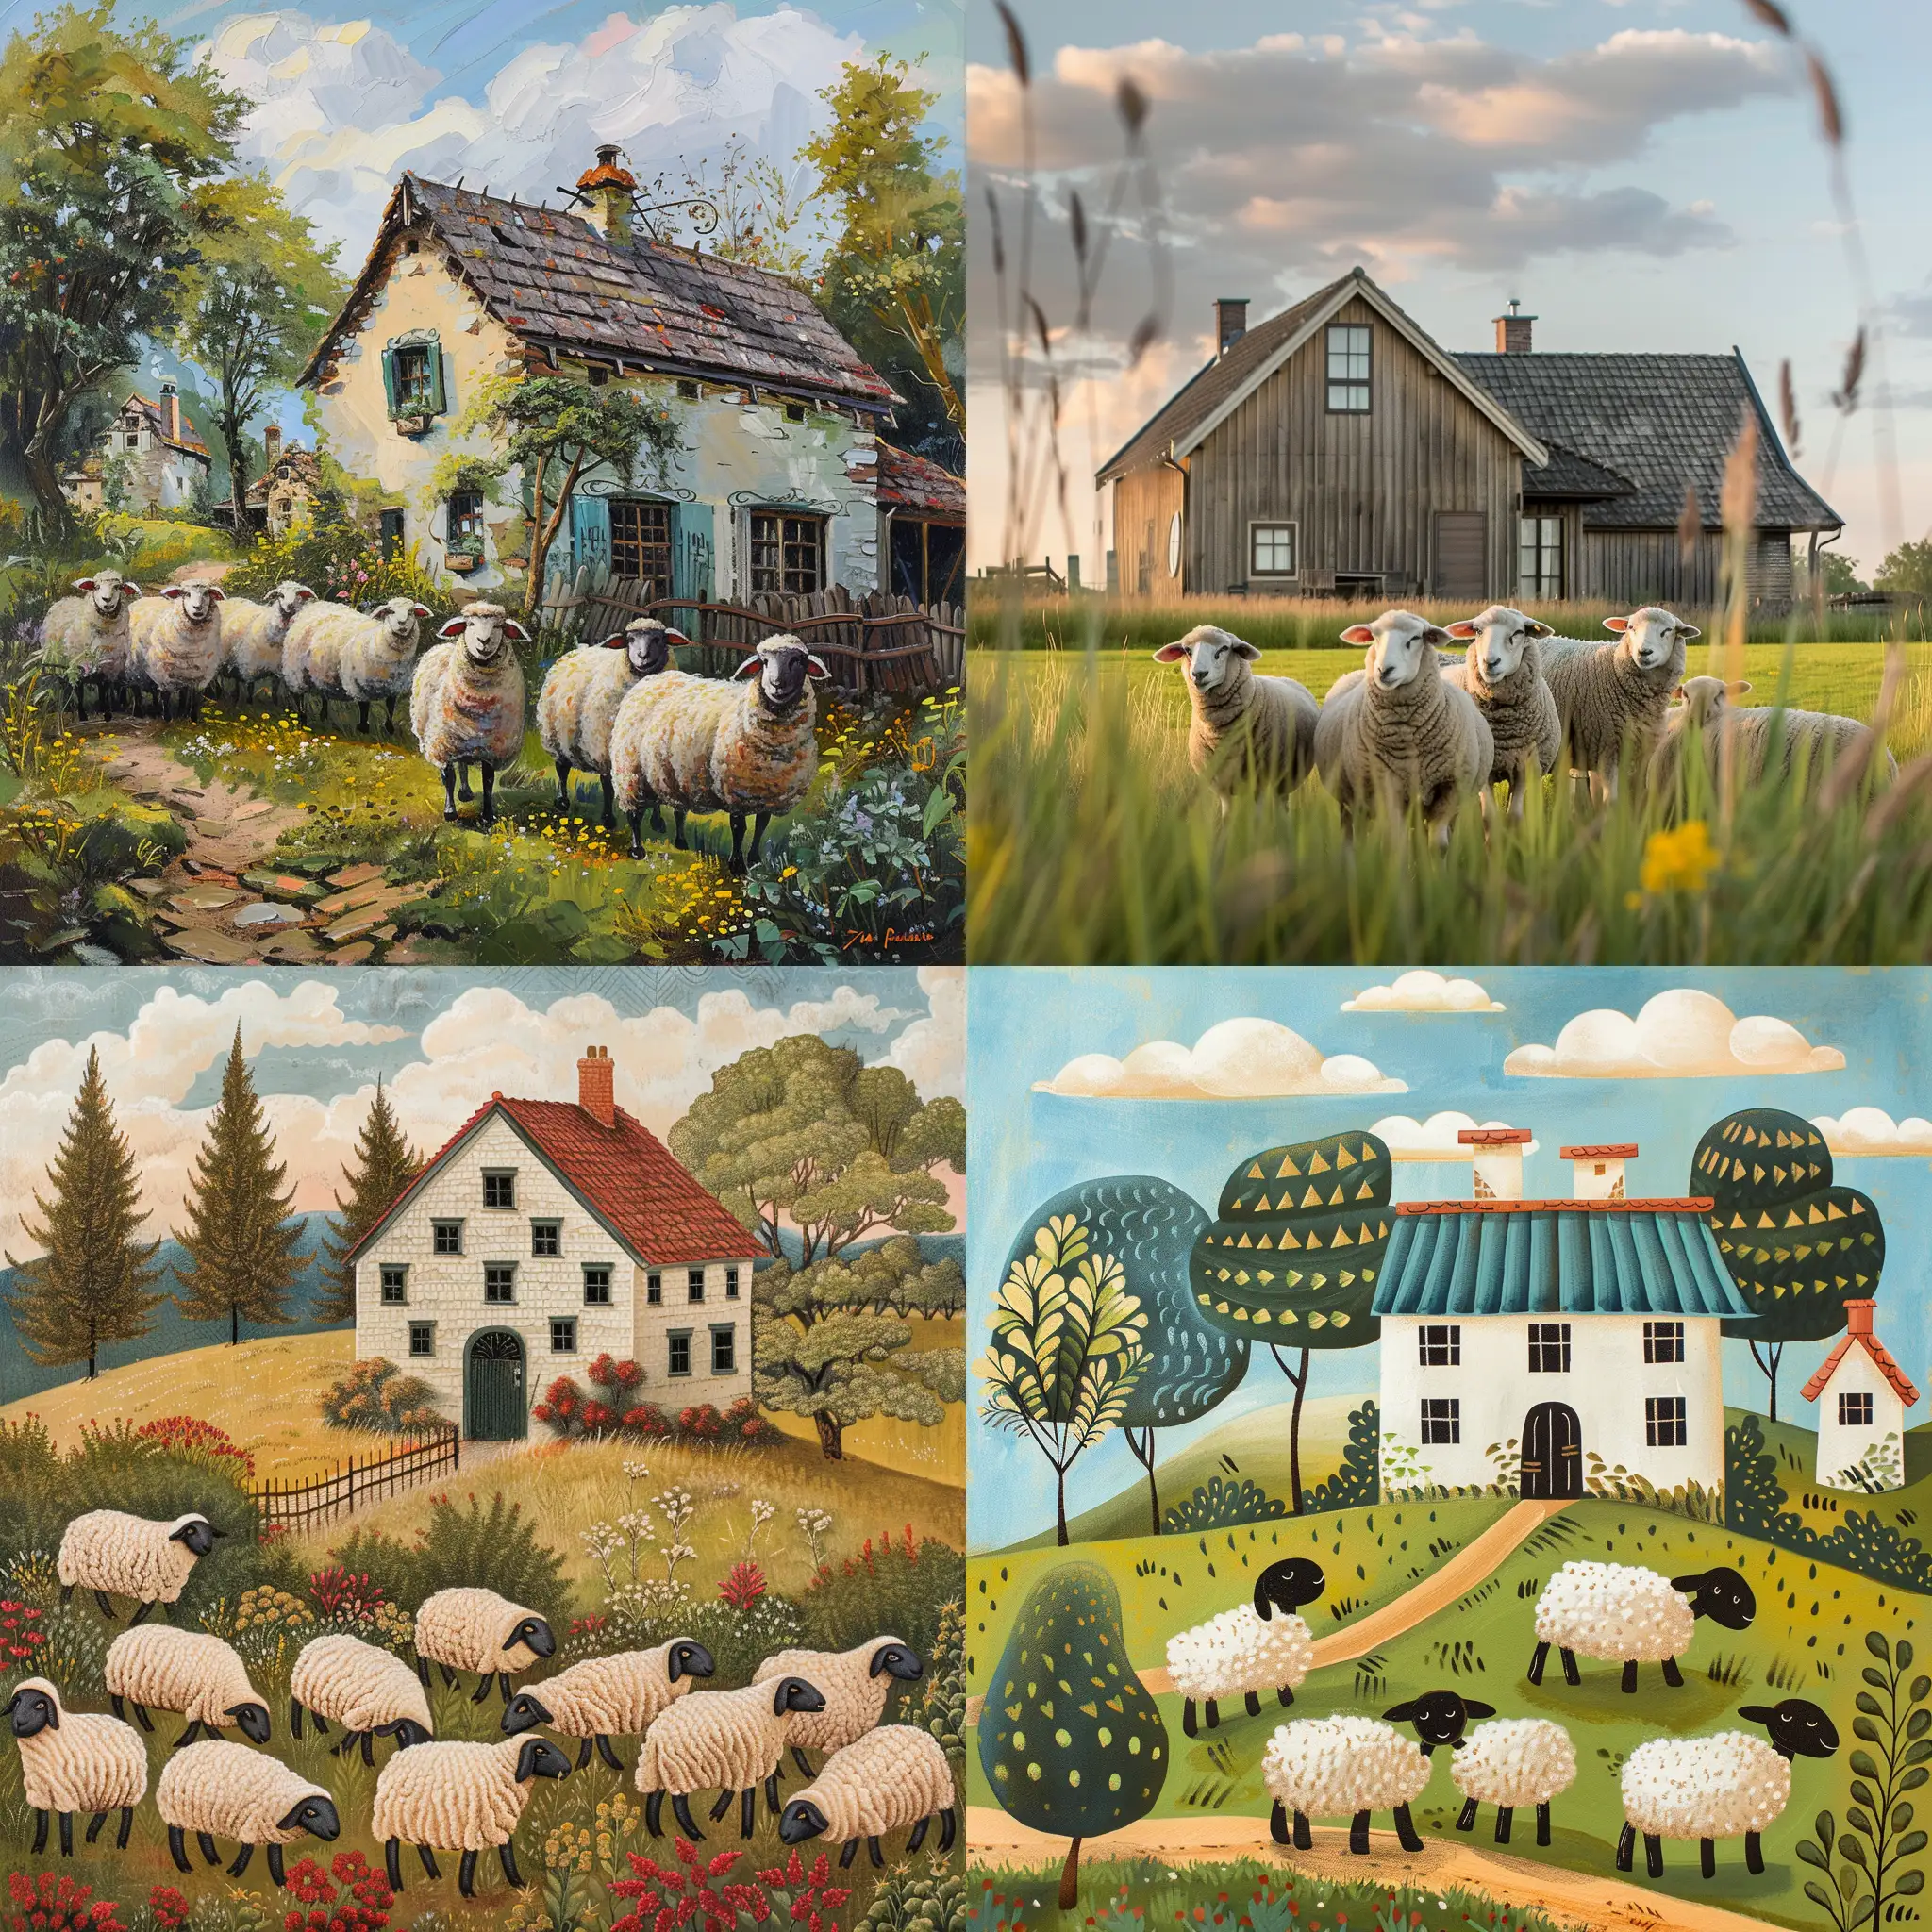 Rural-Farmhouse-Landscape-with-Grazing-Sheep